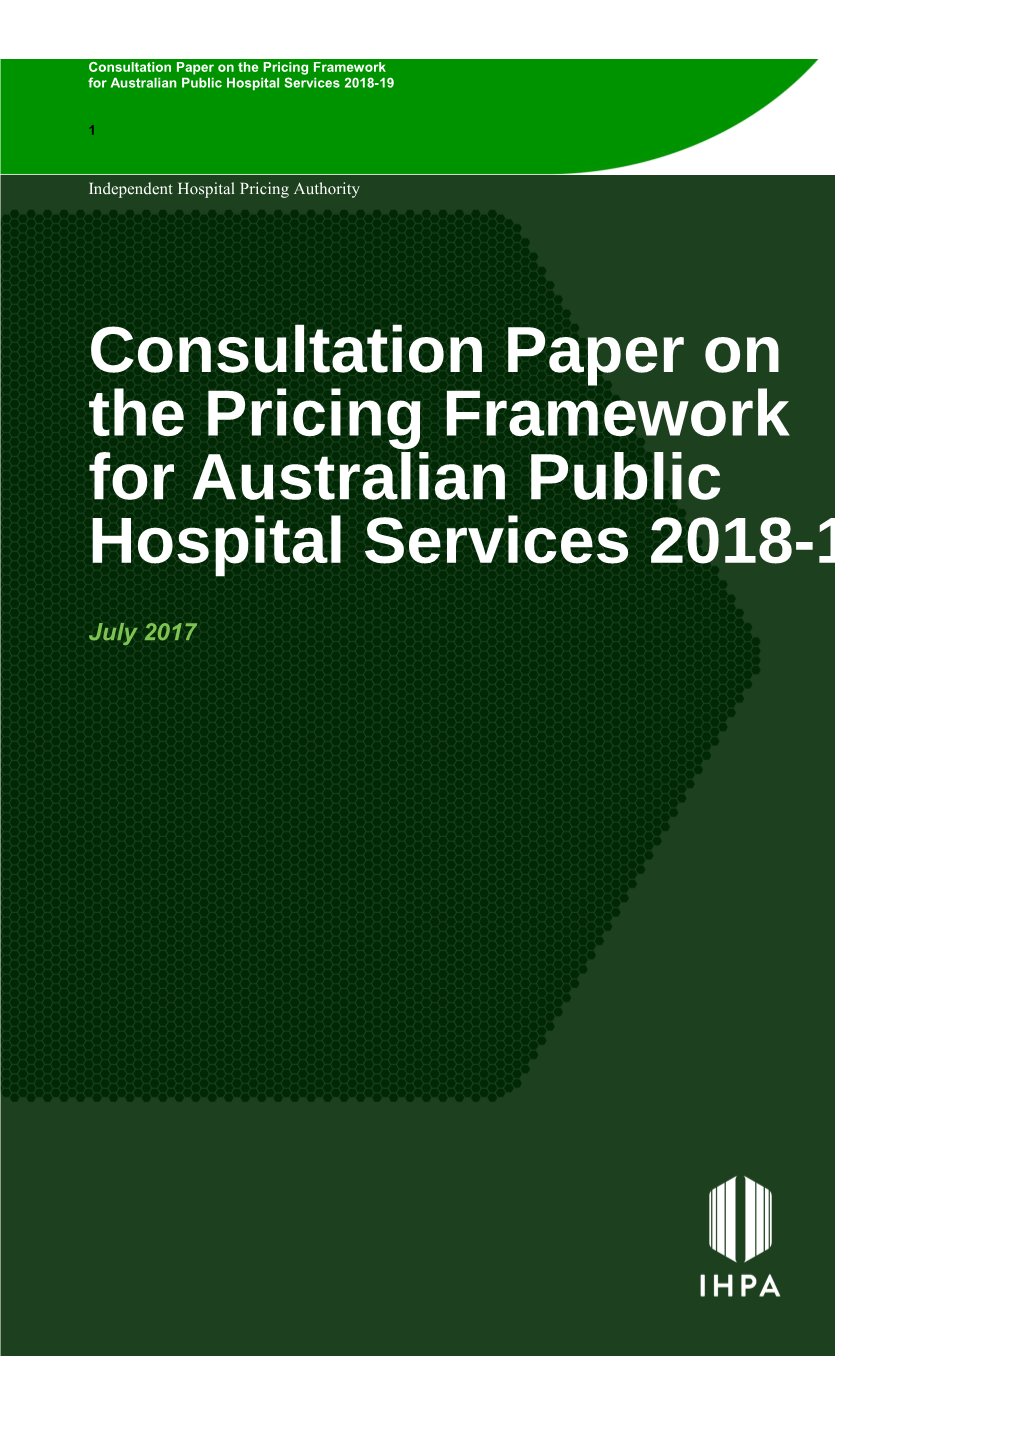 Consultation Paper on the Pricing Framework for Australian Public Hospital Services 2018-19